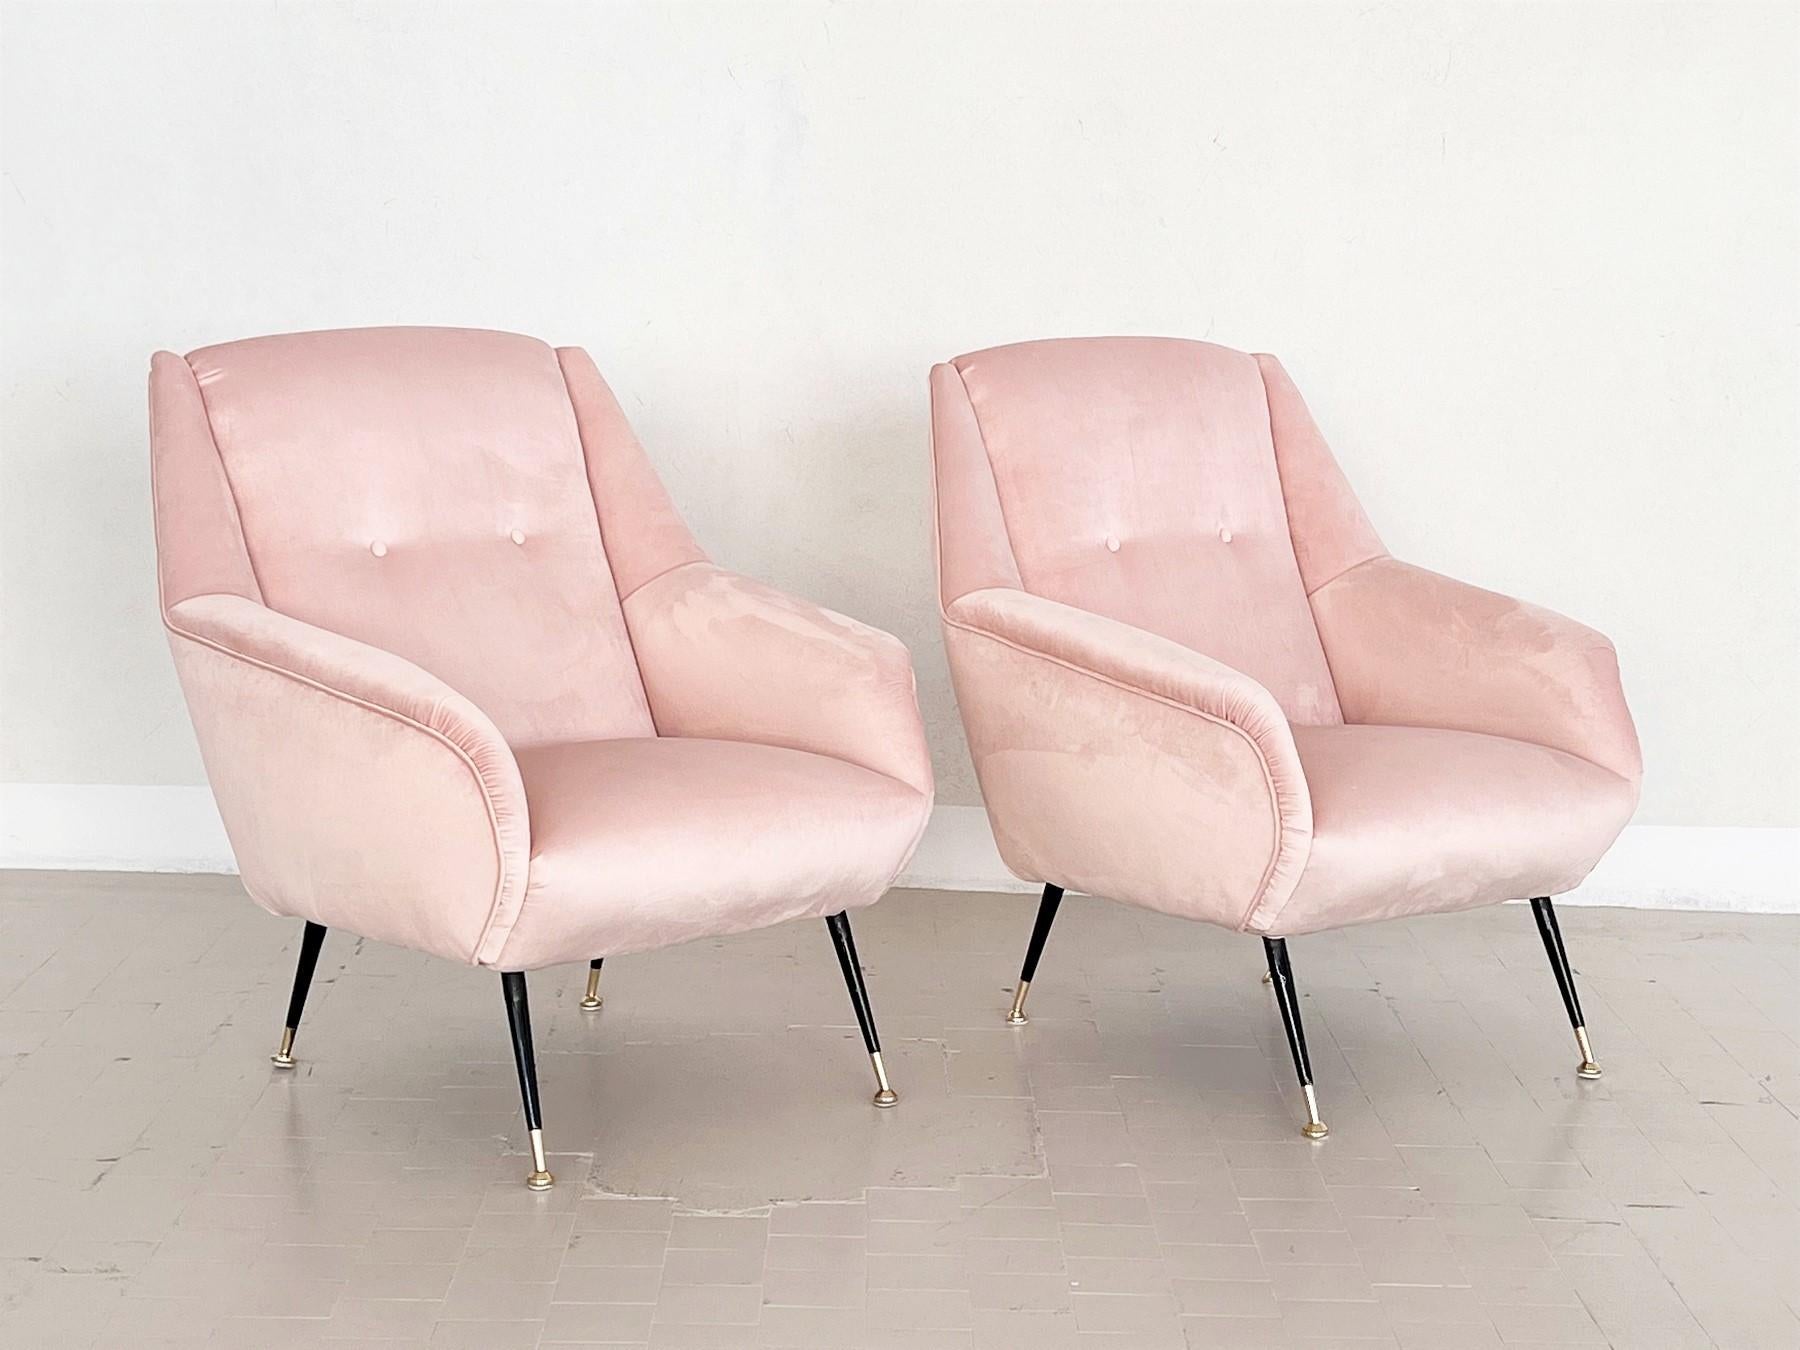 Italian Midcentury Armchairs in Soft Pink Velvet and Brass Tips, 1950s For Sale 10